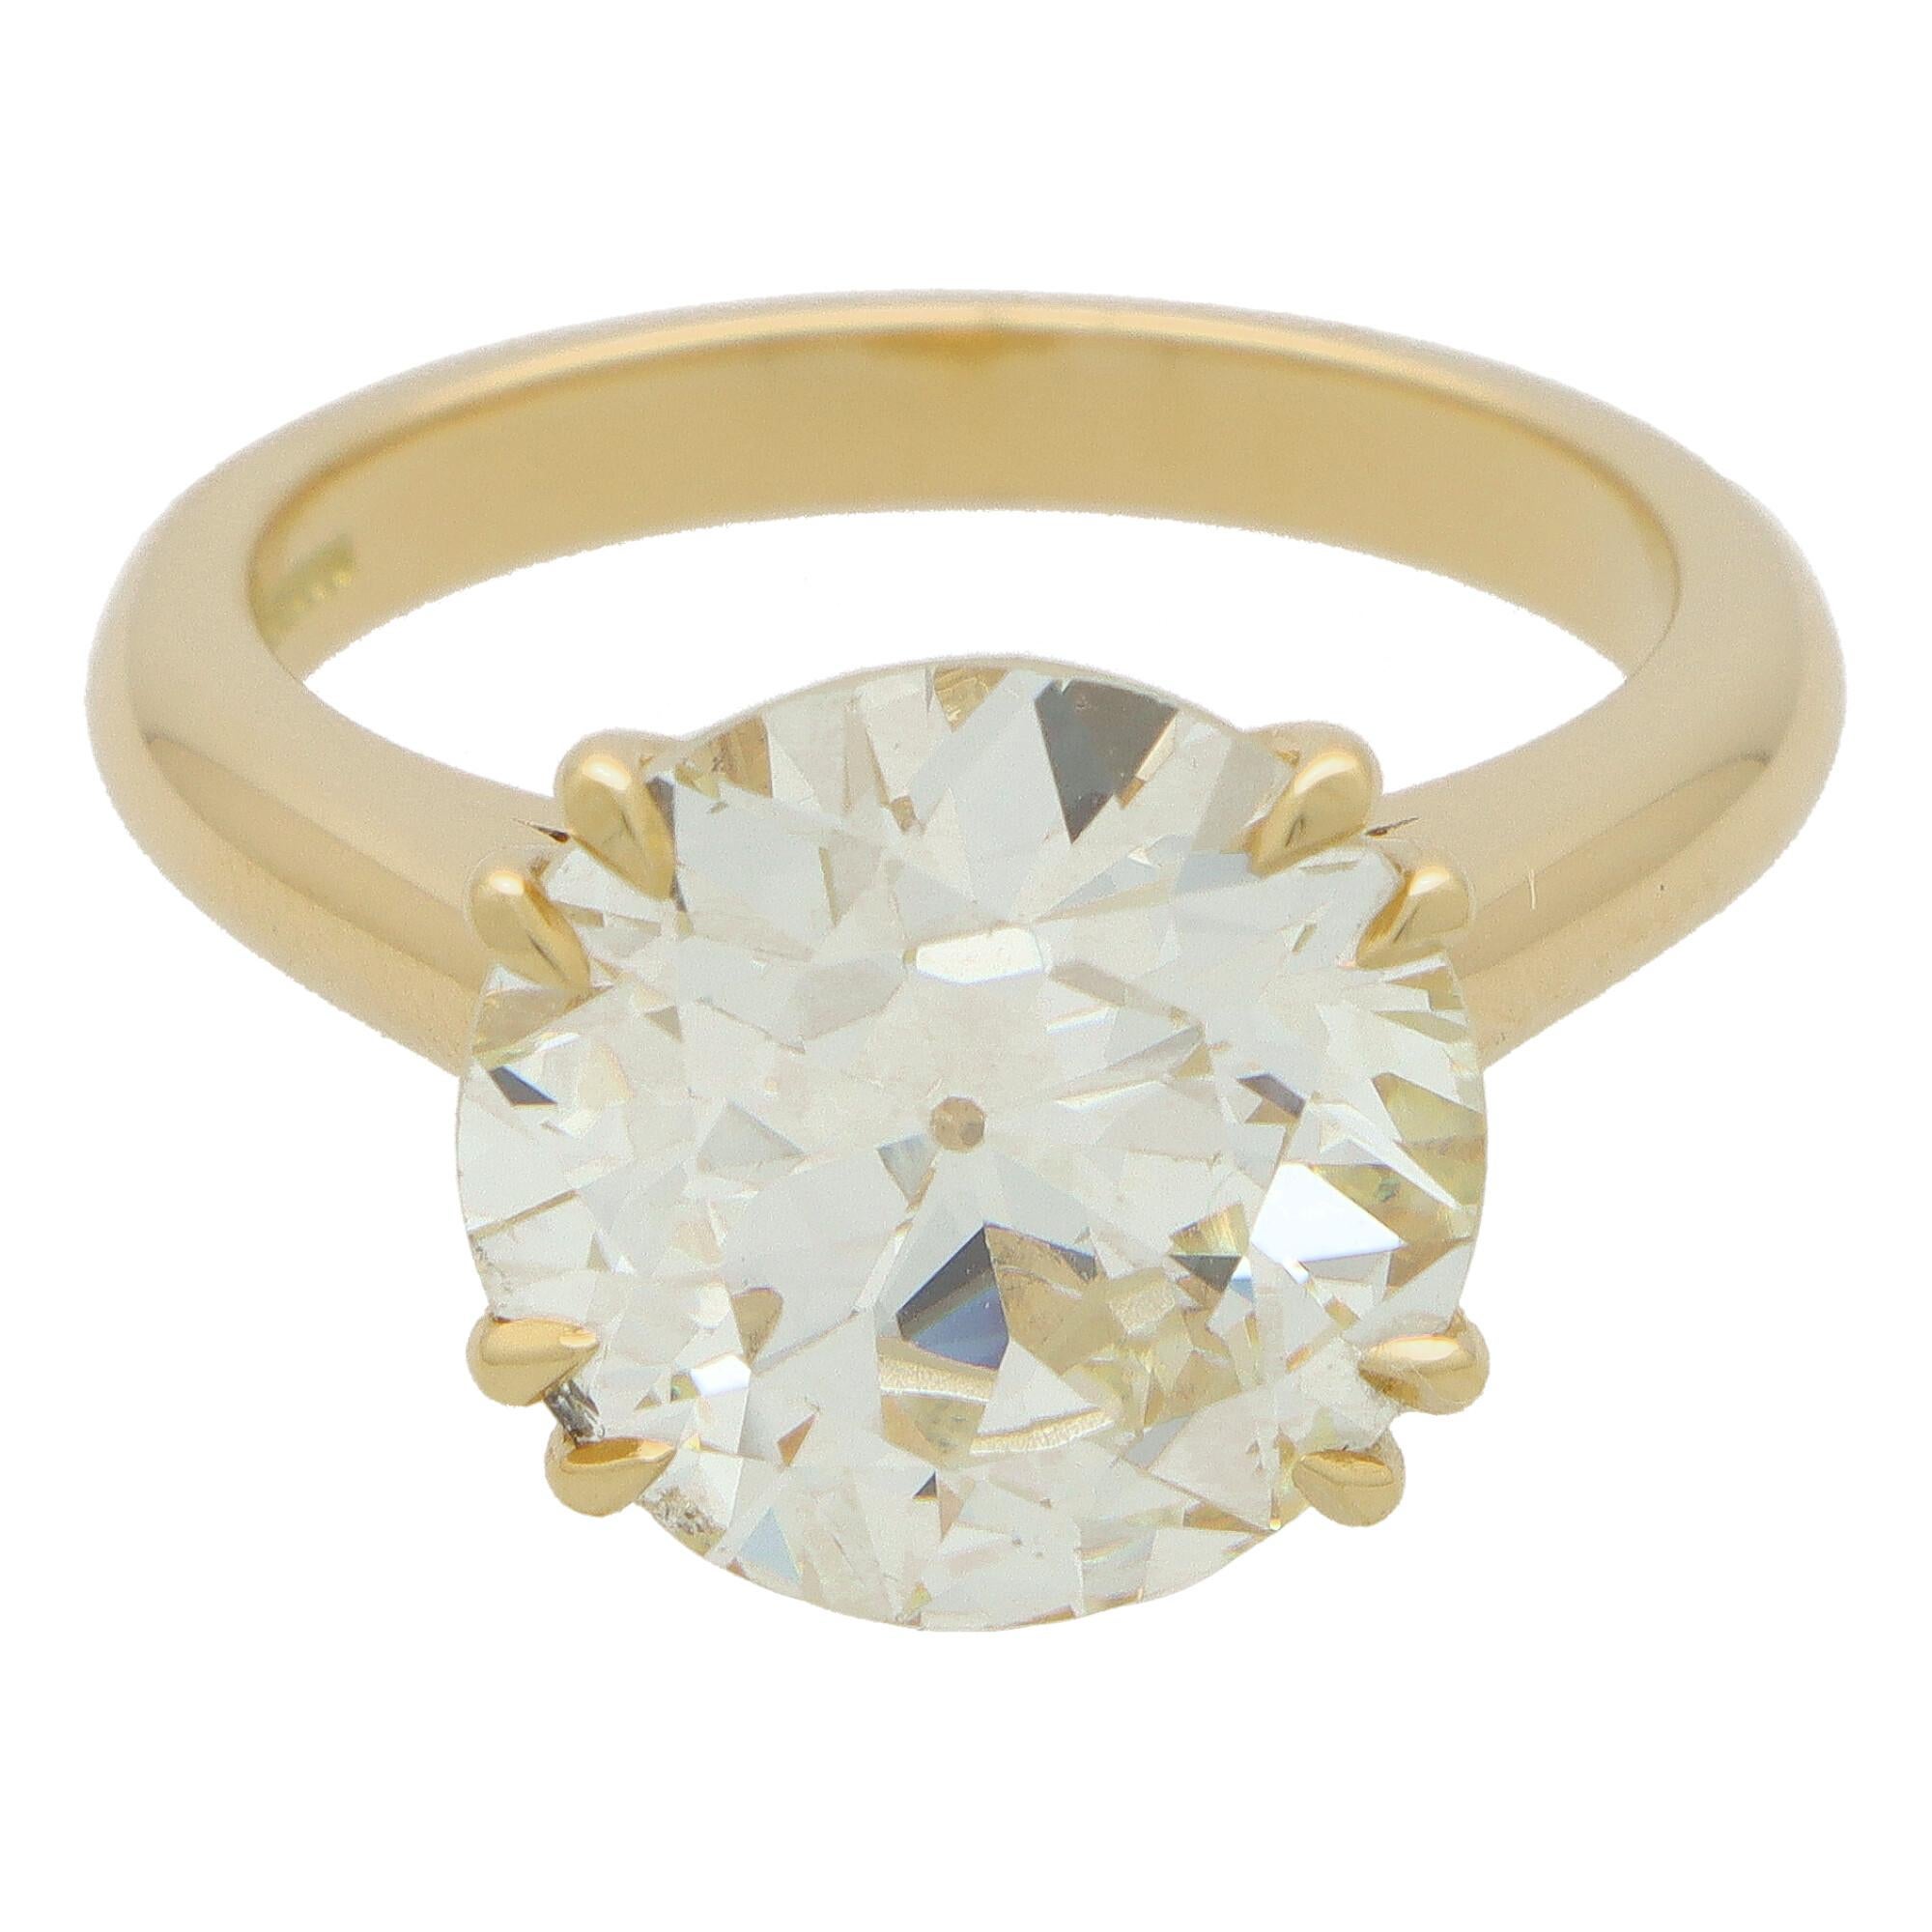 Certified 7.01 Carat Old Cut Diamond Solitaire Ring in Yellow Gold In New Condition For Sale In London, GB